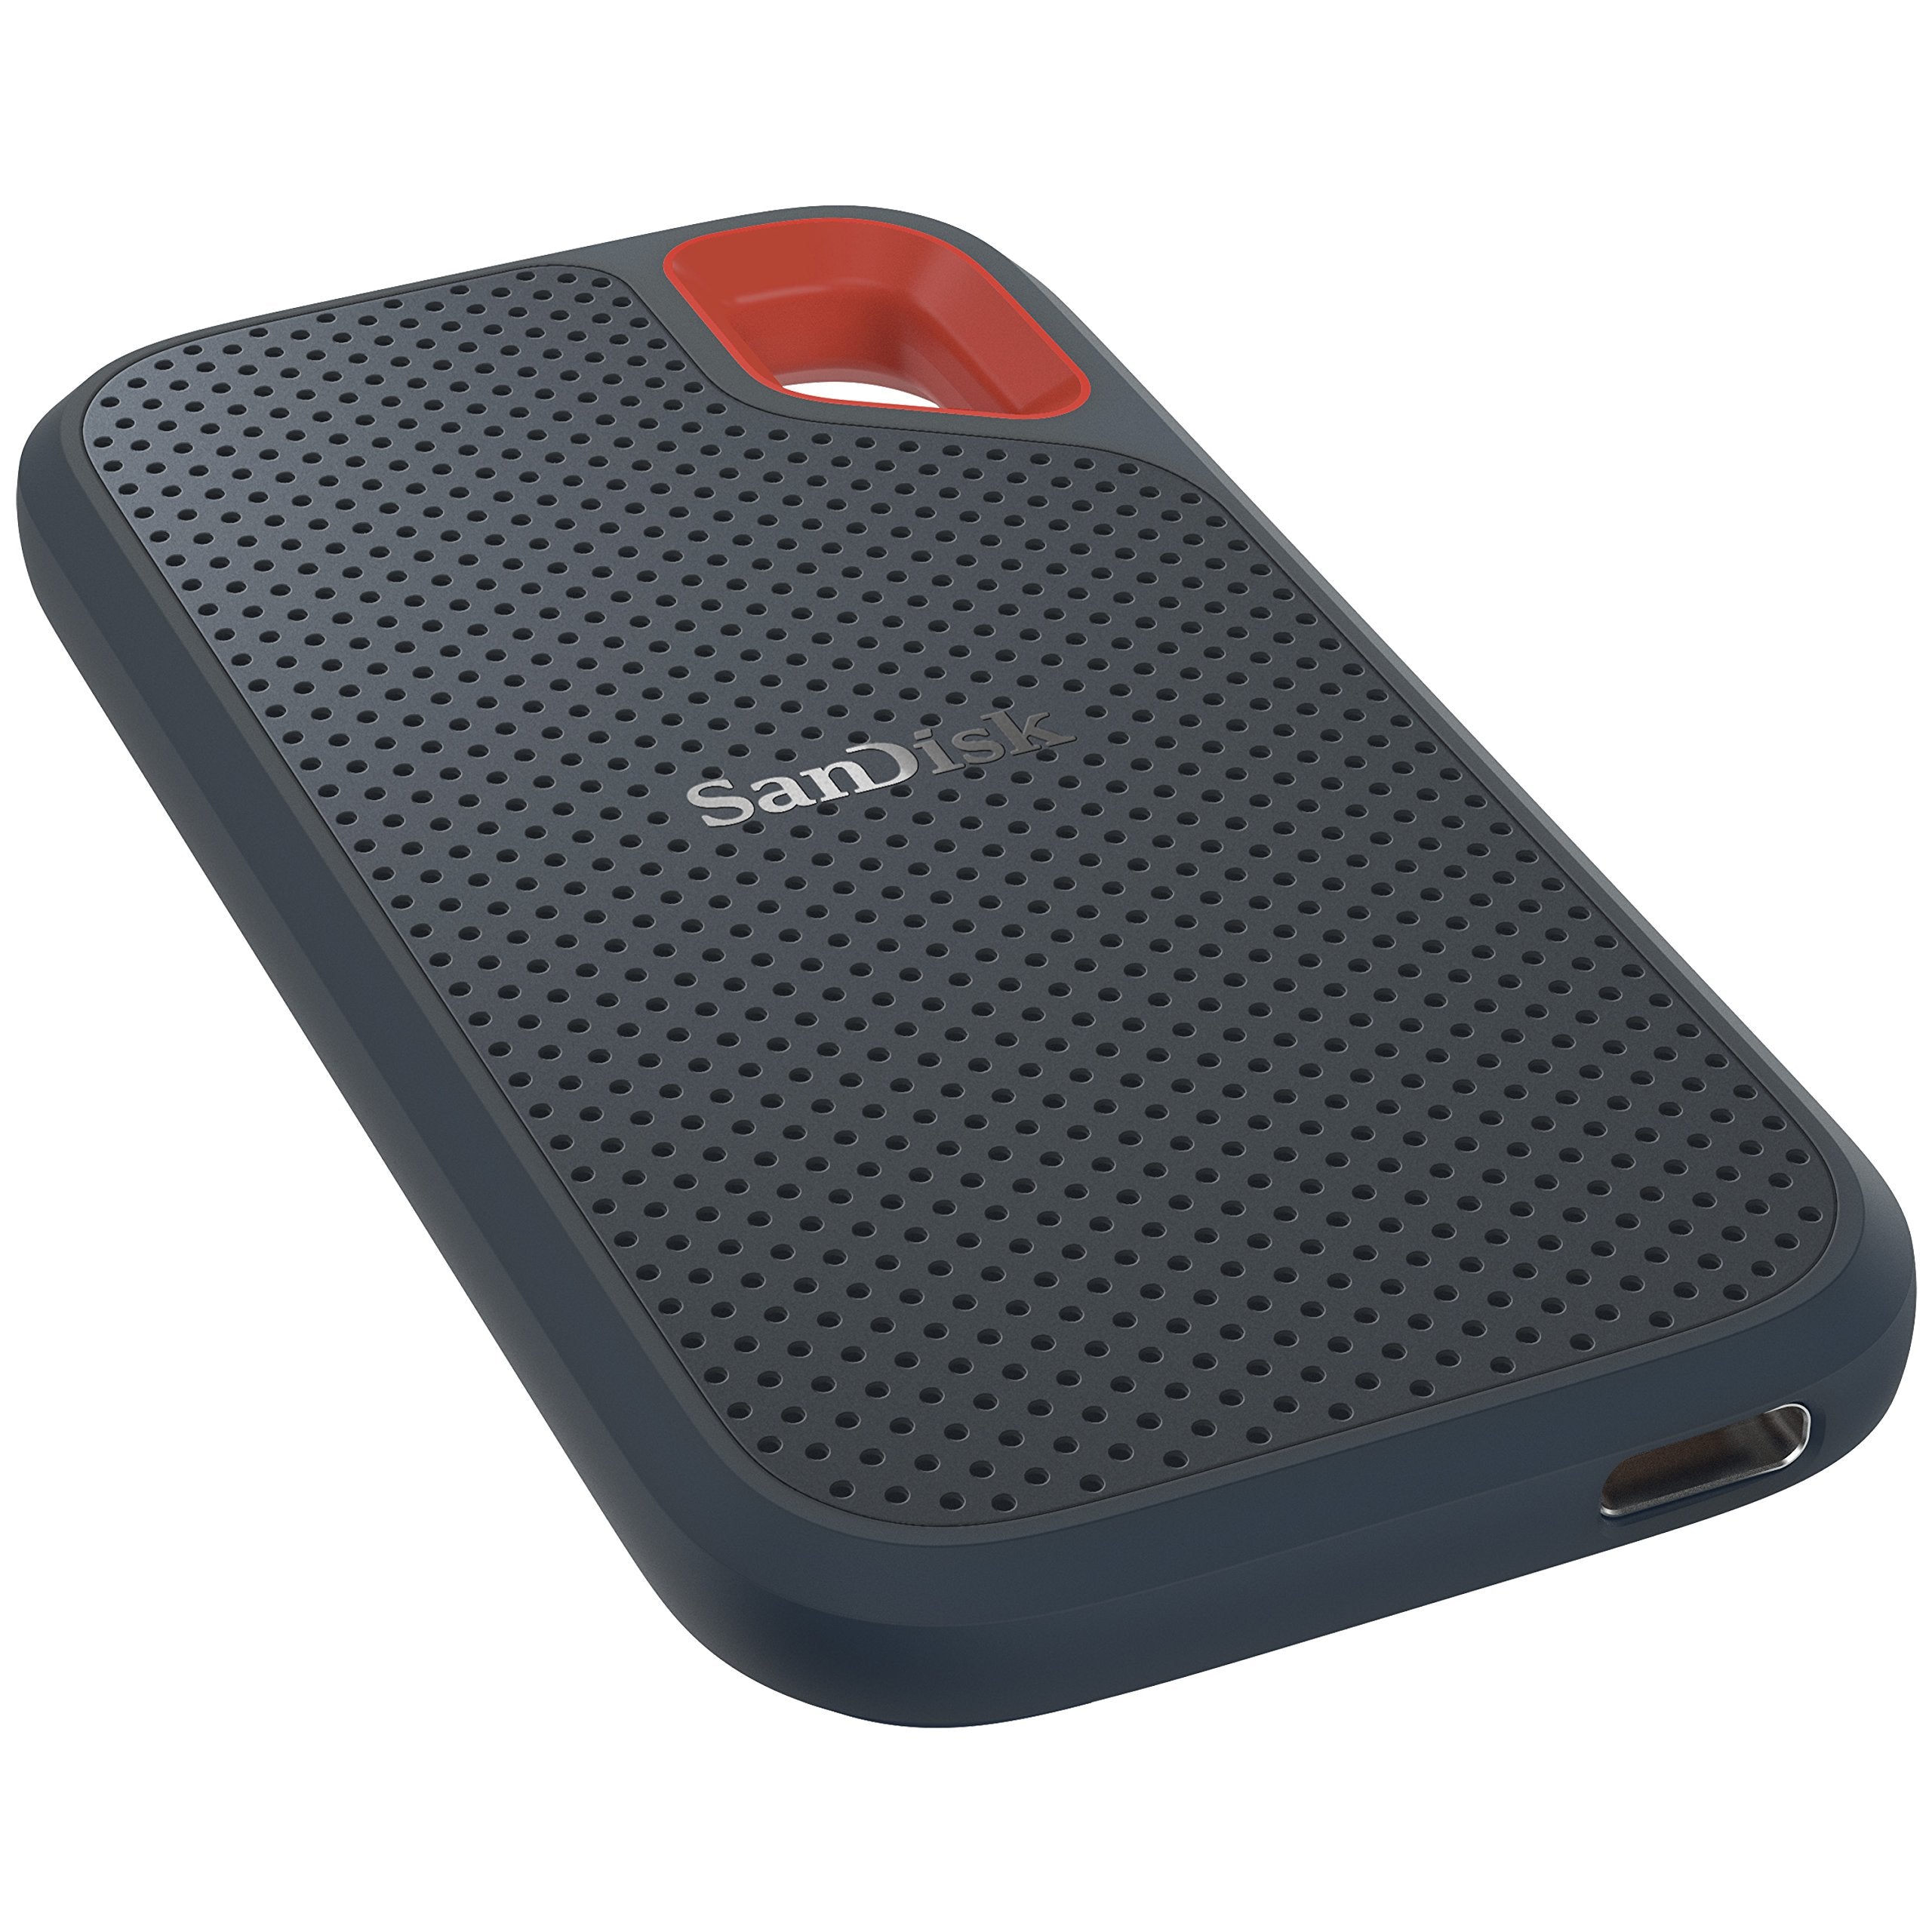 SanDisk 250GB Extreme Portable External SSD - Up to 550MB/s - USB-C, USB 3.1 - SDSSDE60-250G-G25 (Like New, Open Box)